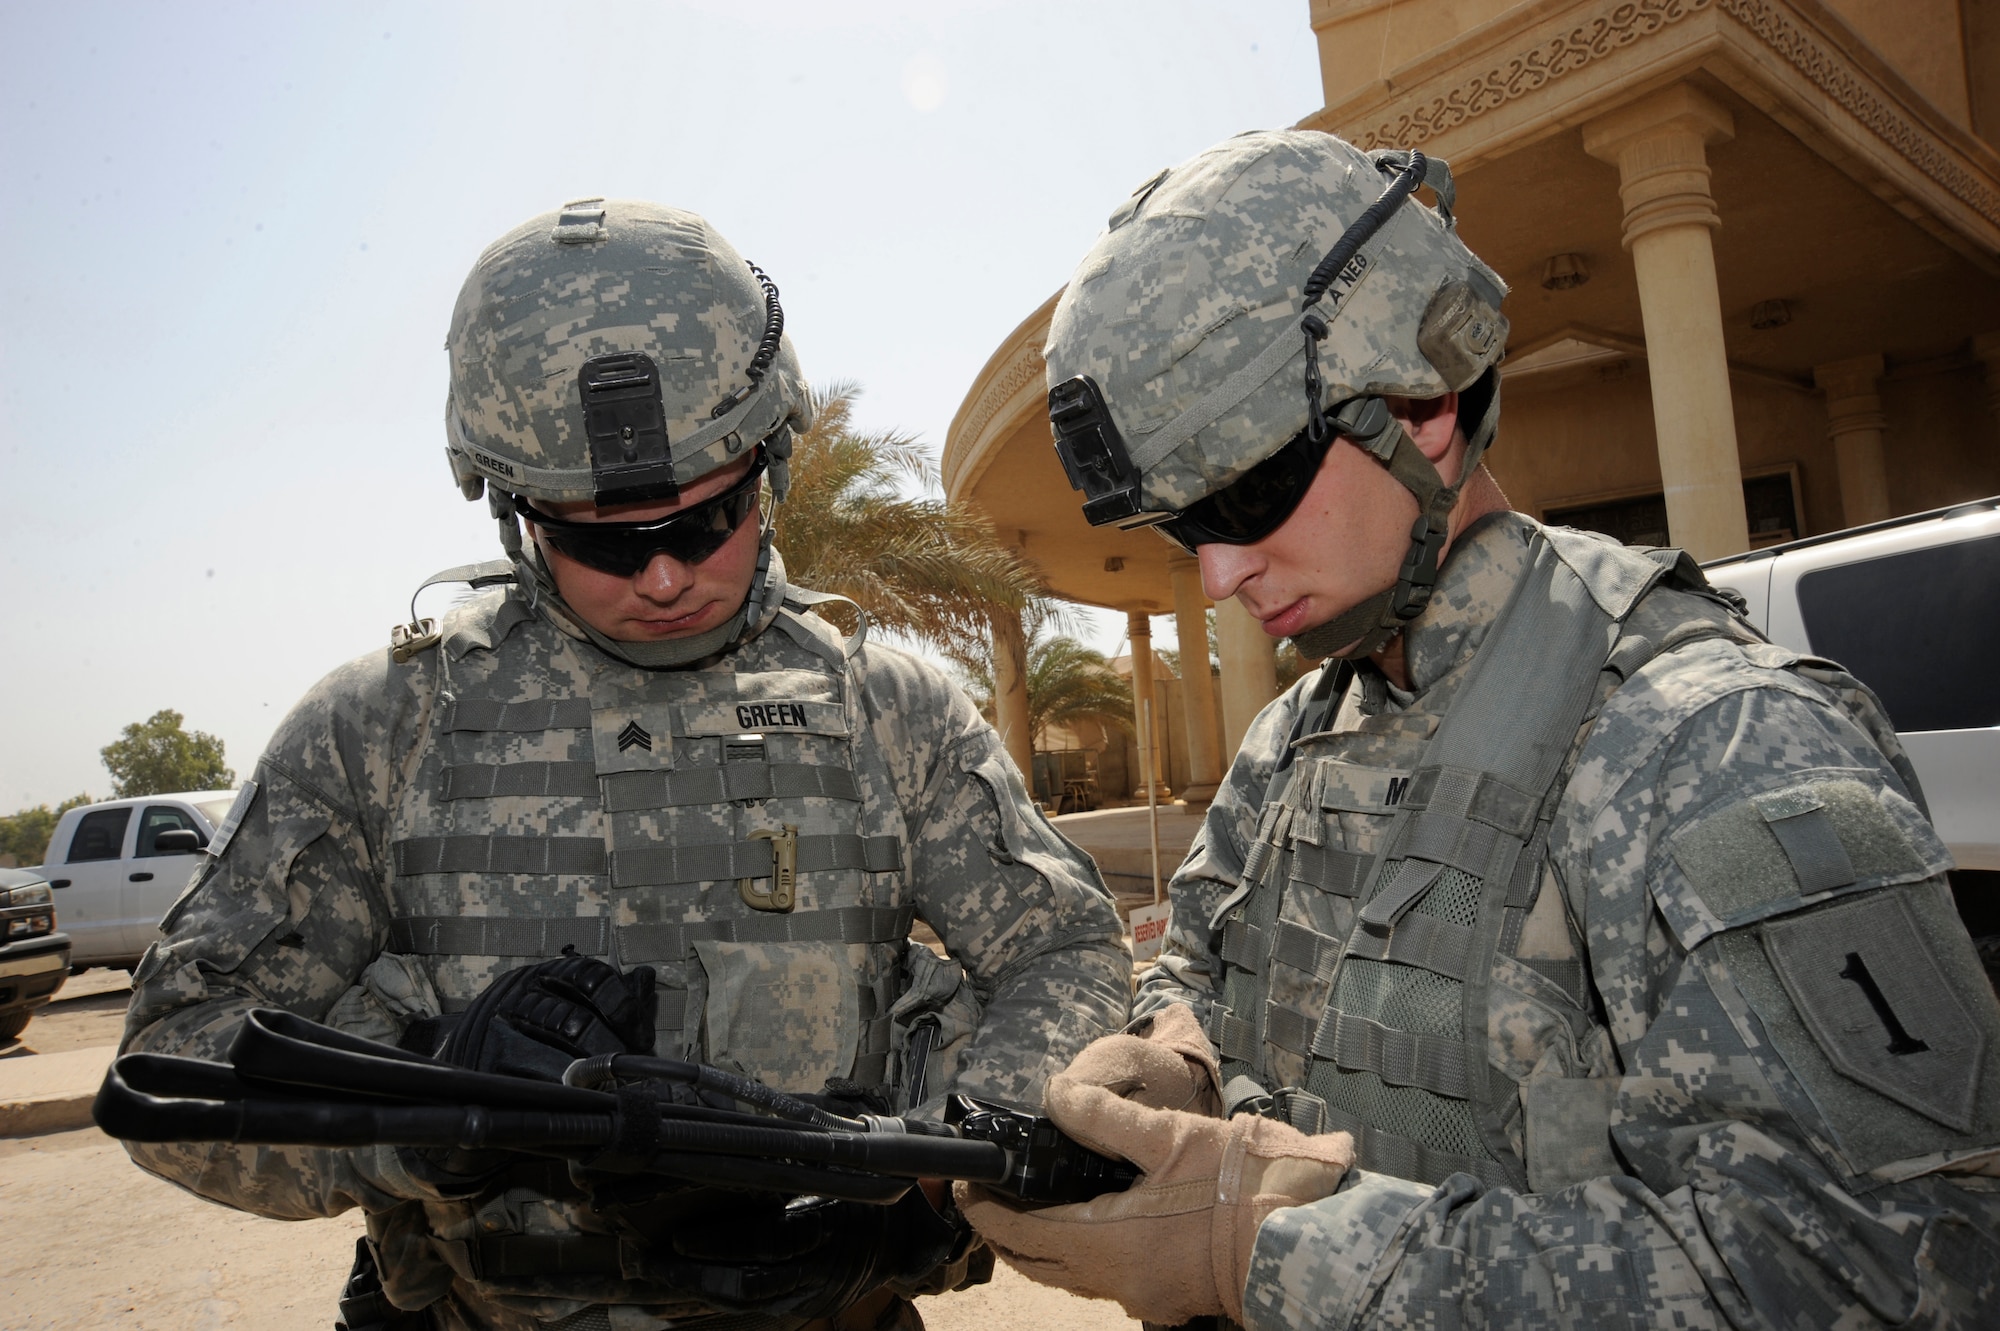 BAGHDAD, Iraq - Prior to the start of a mission, Army Sgt. Justin Green (left) and Pfc. Michael Moore (right) program a simple key loader to allow their radios to communicate securely between vehicles during a detail here July 20, 2009. Their personal security detail team provides constant security to the individual they are assigned to ensure the member is safely and securely transported to, from and inside various locations. Sergeant Green is originally from Madison, W.Va., and Private Moore is from Memphis, Tenn. Both are deployed from the 2nd Brigade Heavy Combat Team, 1st Infantry Division, Fort Riley, Kan. (U.S. Air Force photo/Tech. Sgt. Johnny L. Saldivar/Released)